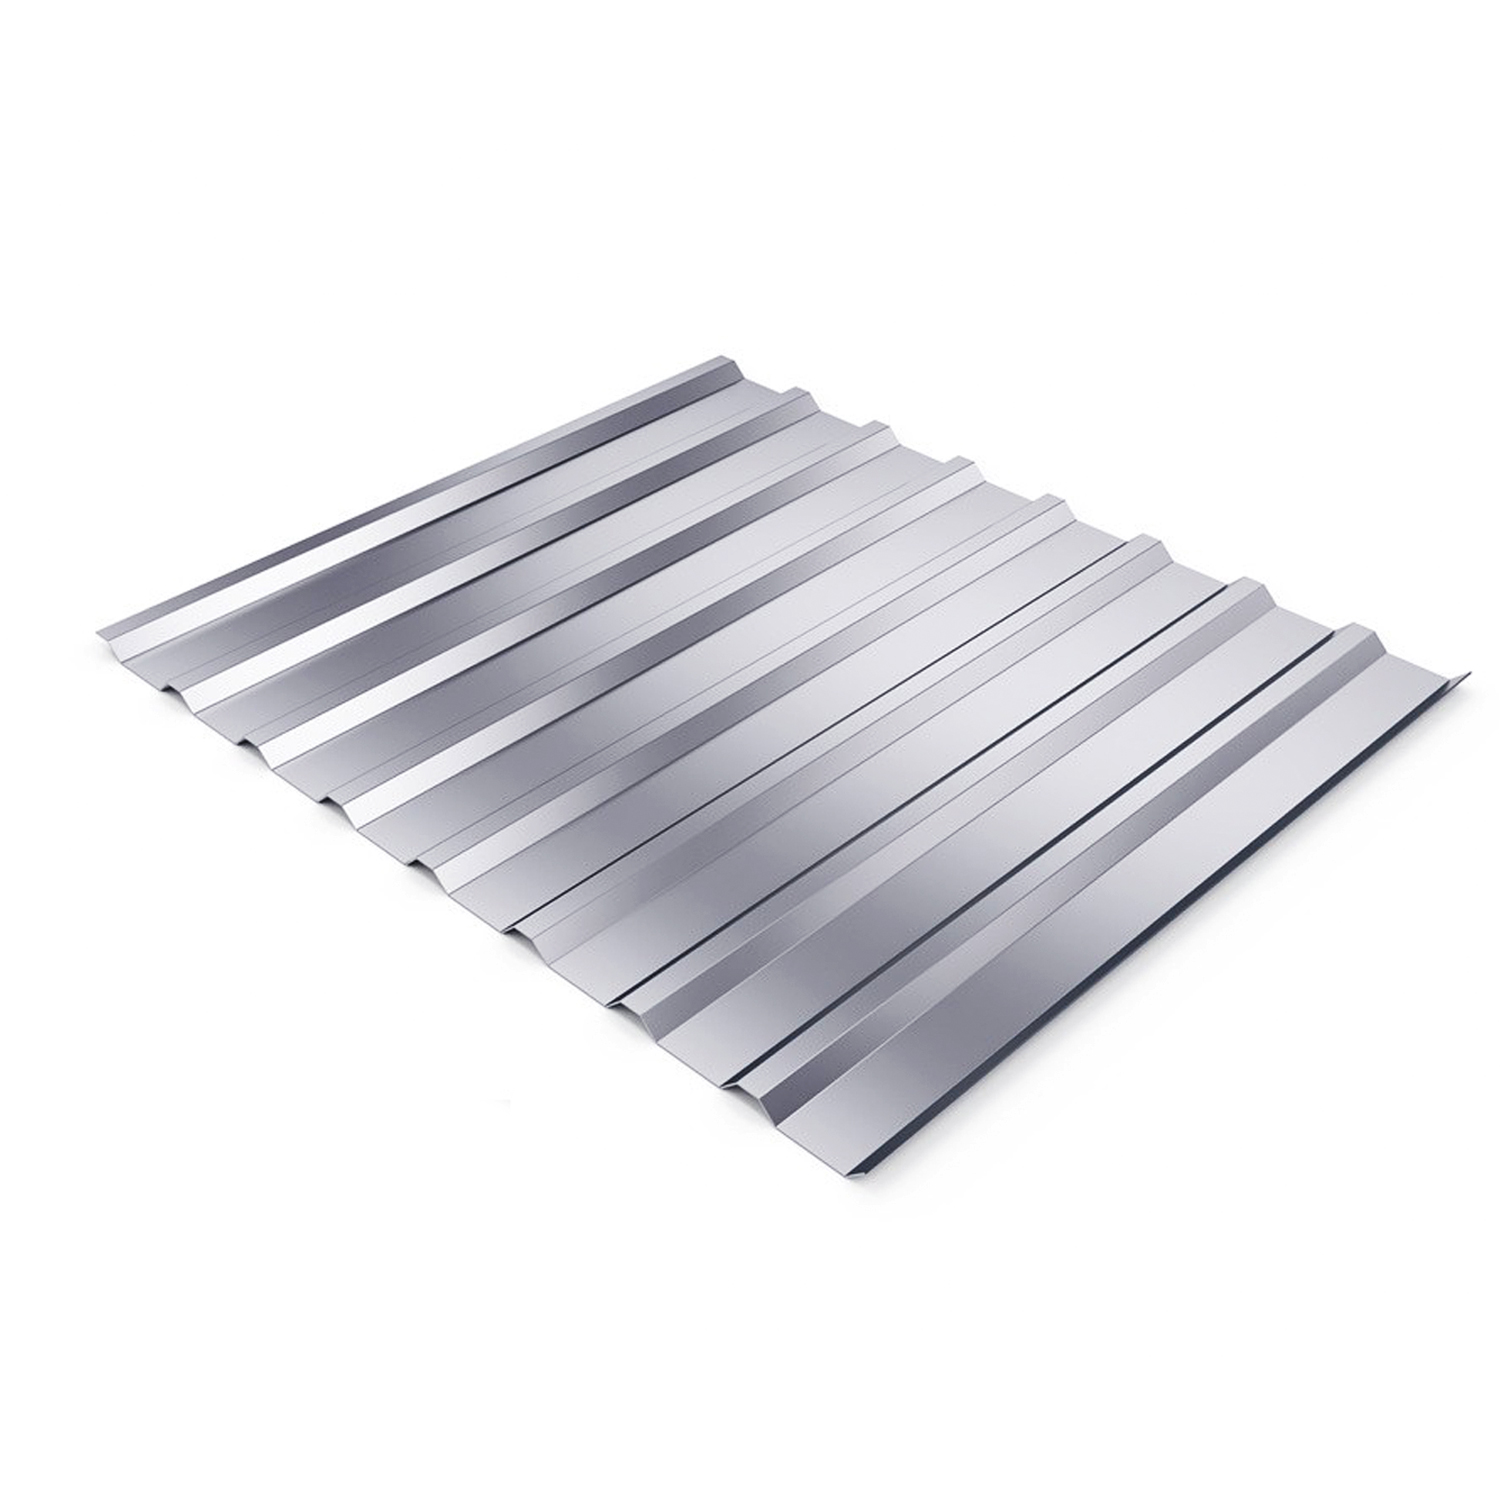 Factory Direct Sale High Quality Colour Coated Steel Roofing Sheet Roofing Prices Low Slope Roofing